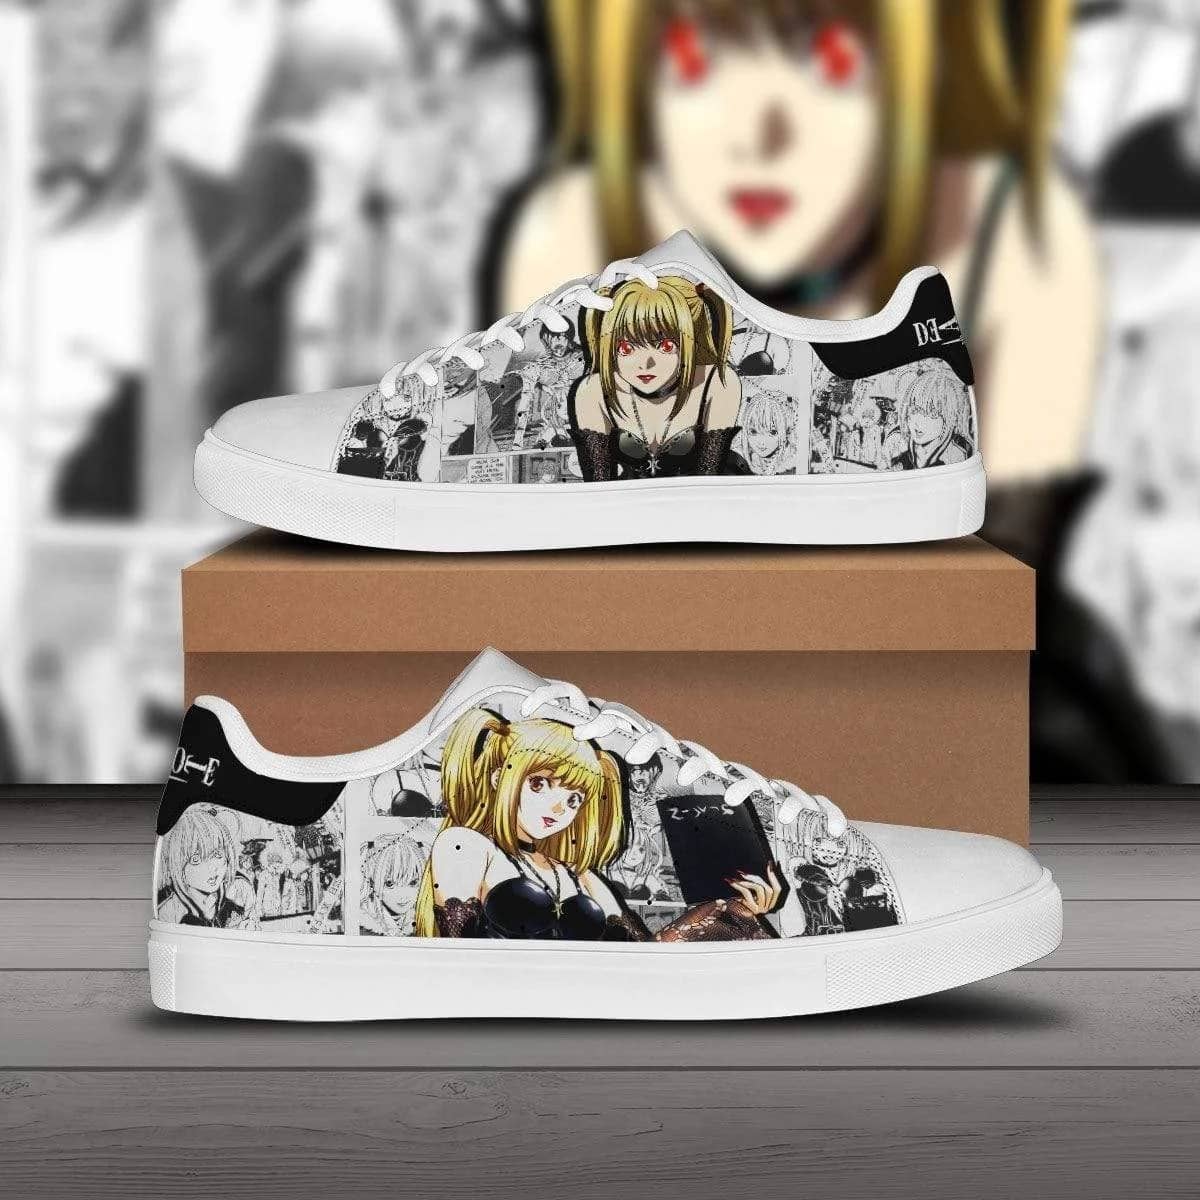 Misa Amane Death Note Custom Anime Stan Smith Shoes